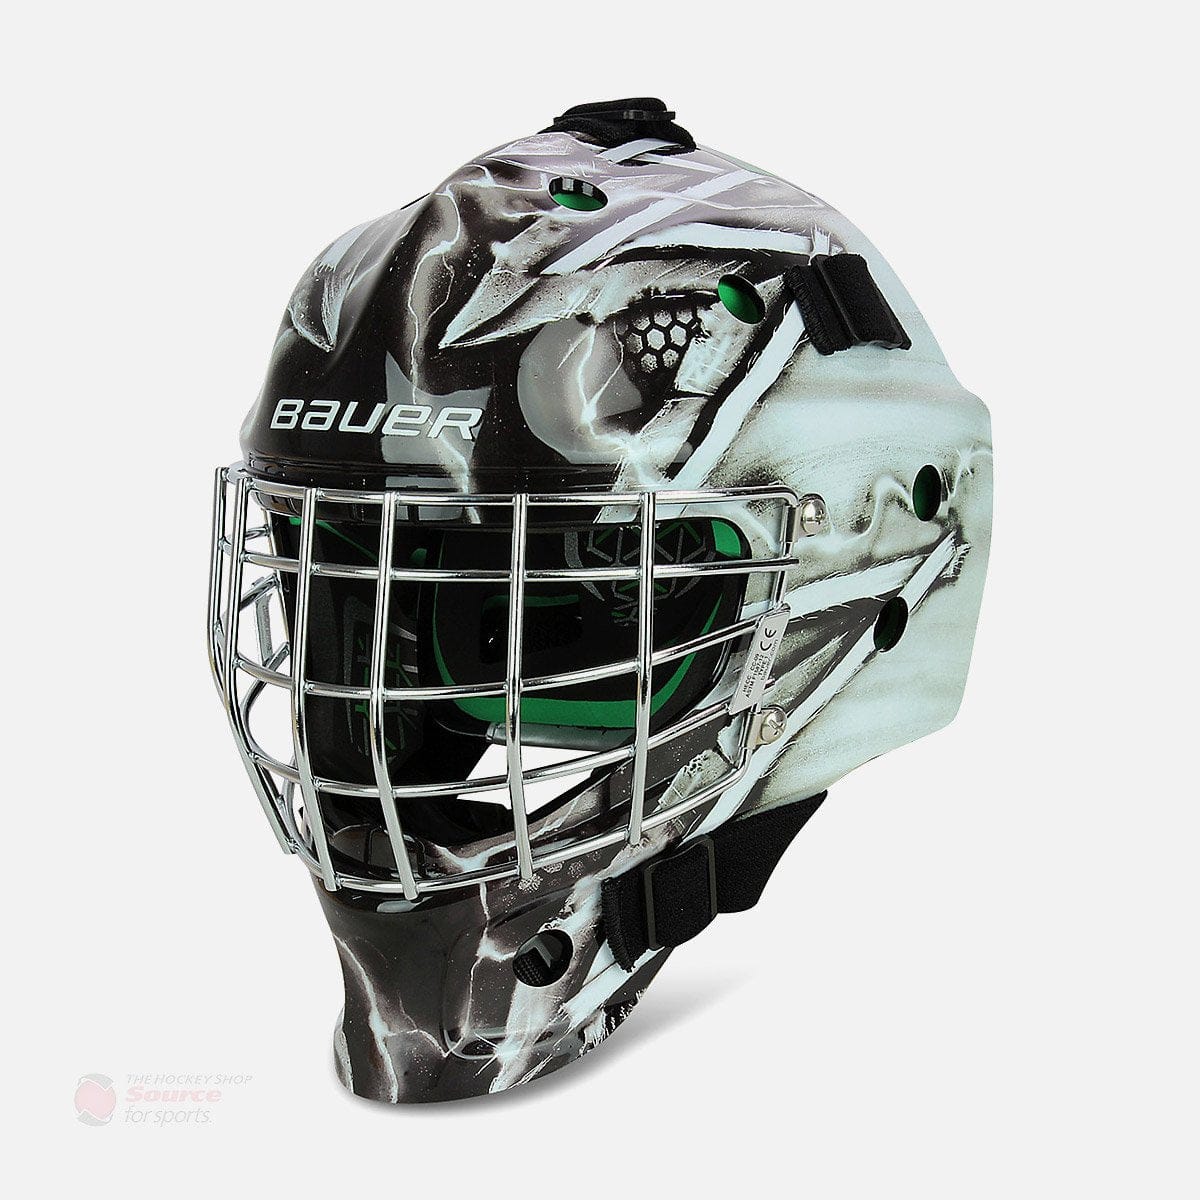 Bauer NME Street Youth Goalie Mask - White